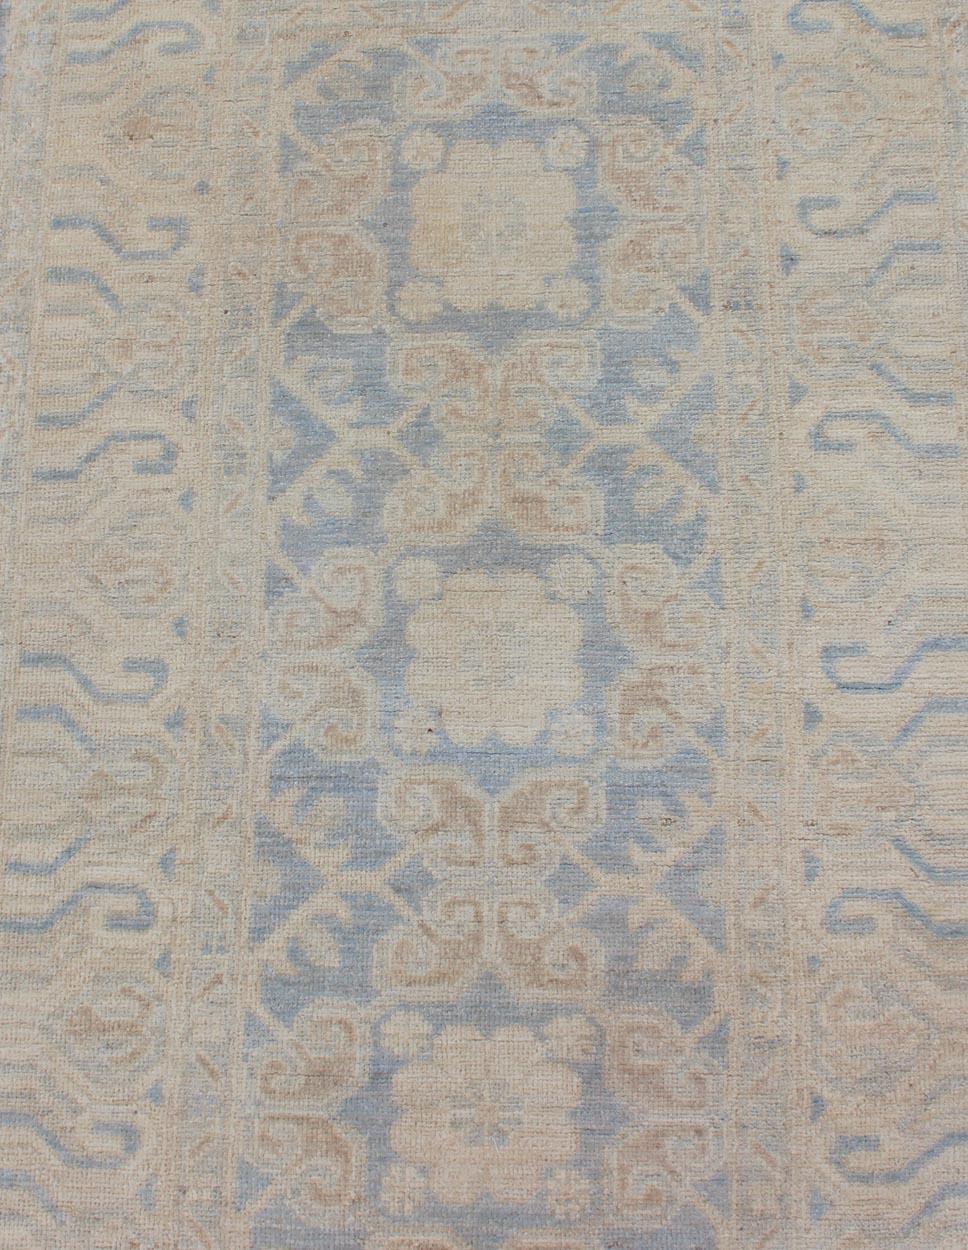 Afghan Khotan Runner with Geometric Design in Shades of Powder Blue and Tan For Sale 2